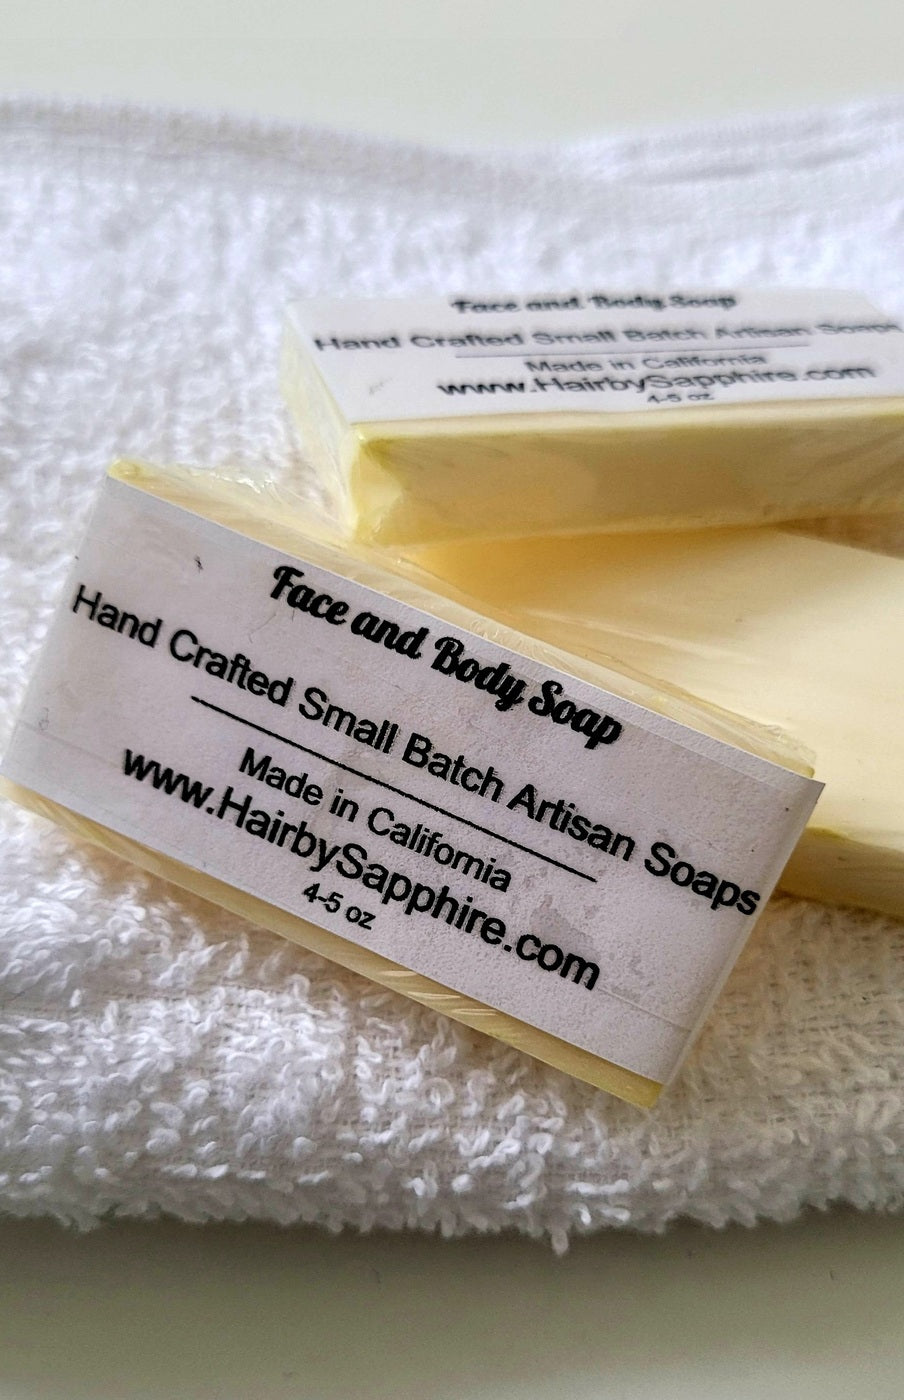 face and body hotel soap for hotel, inn, motel, resorts, airbnb, vrbo, bed in breakfast, cruelty free, paraben free